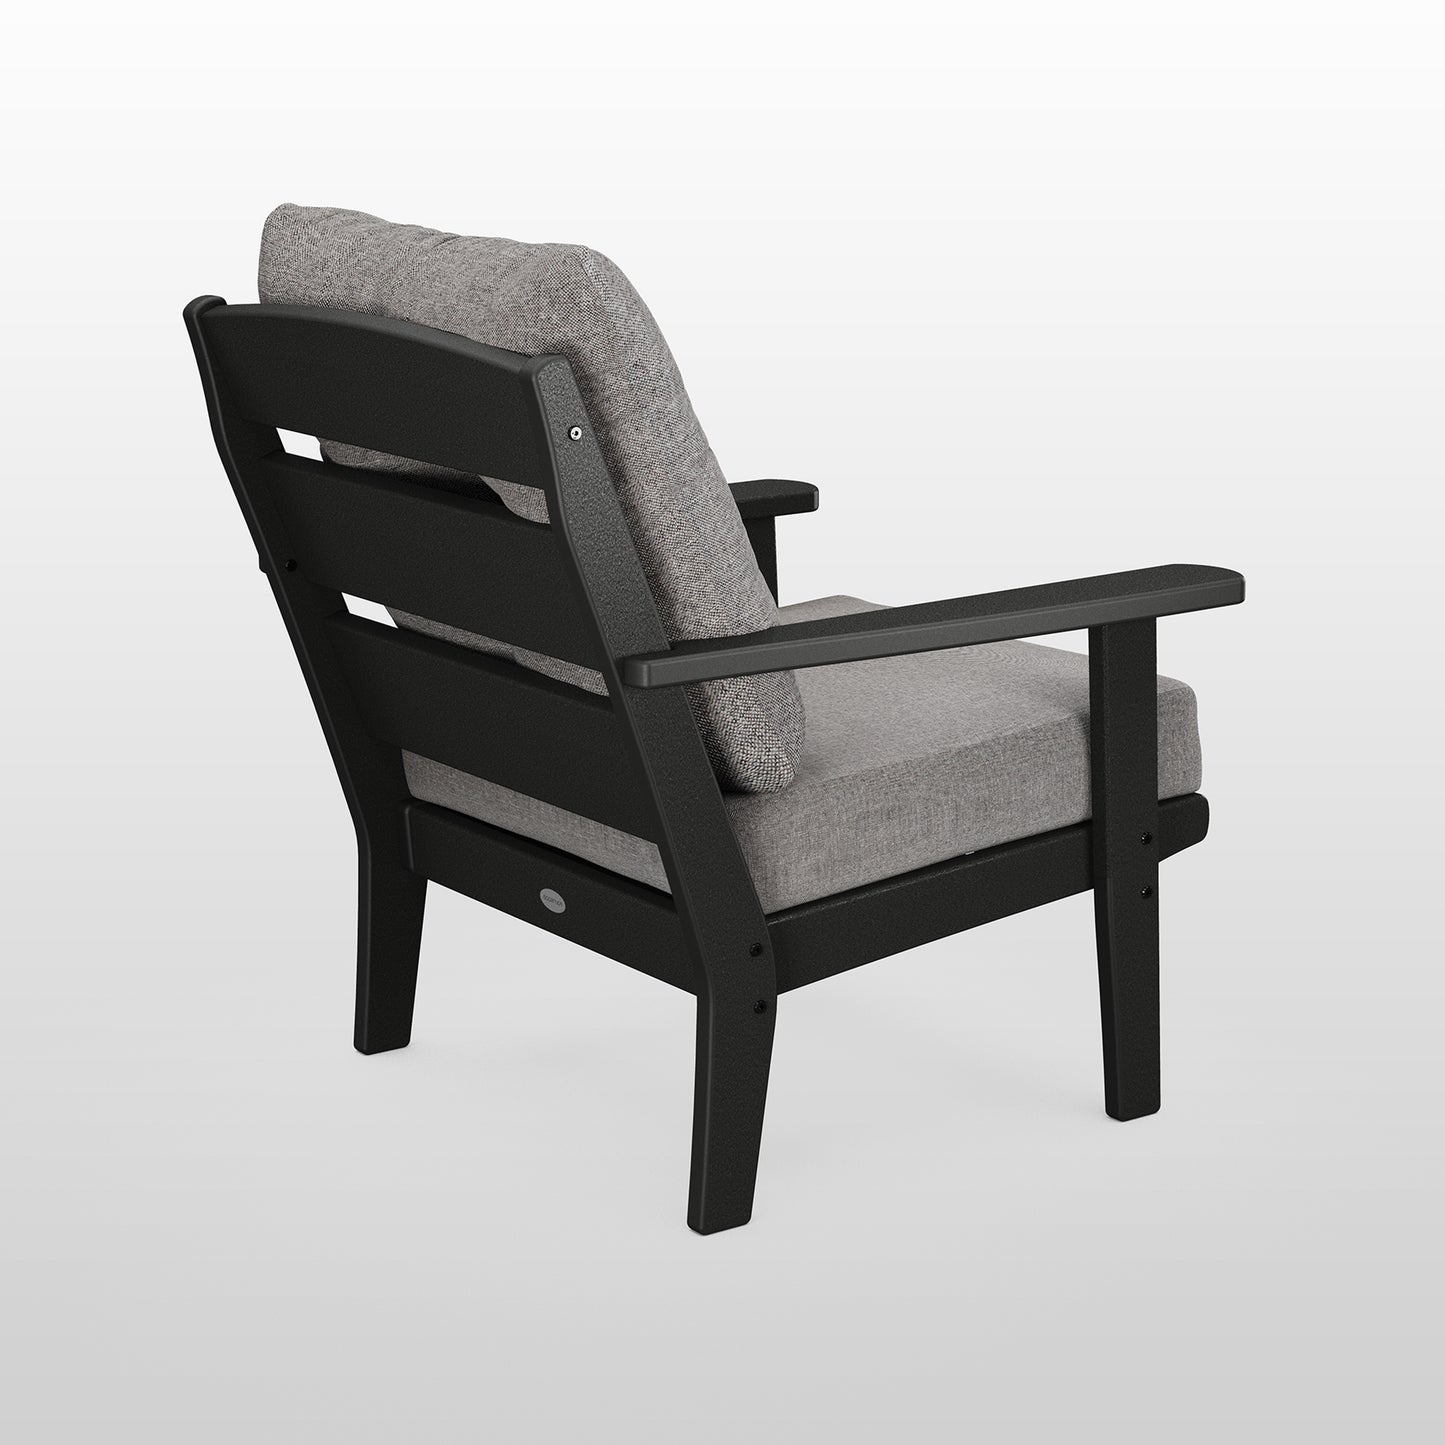 A modern black POLYWOOD® Lakeside Deep Seating Chair with gray cushions, featuring a geometric, angular design and sturdy armrests. The chair is shown against a plain white background.